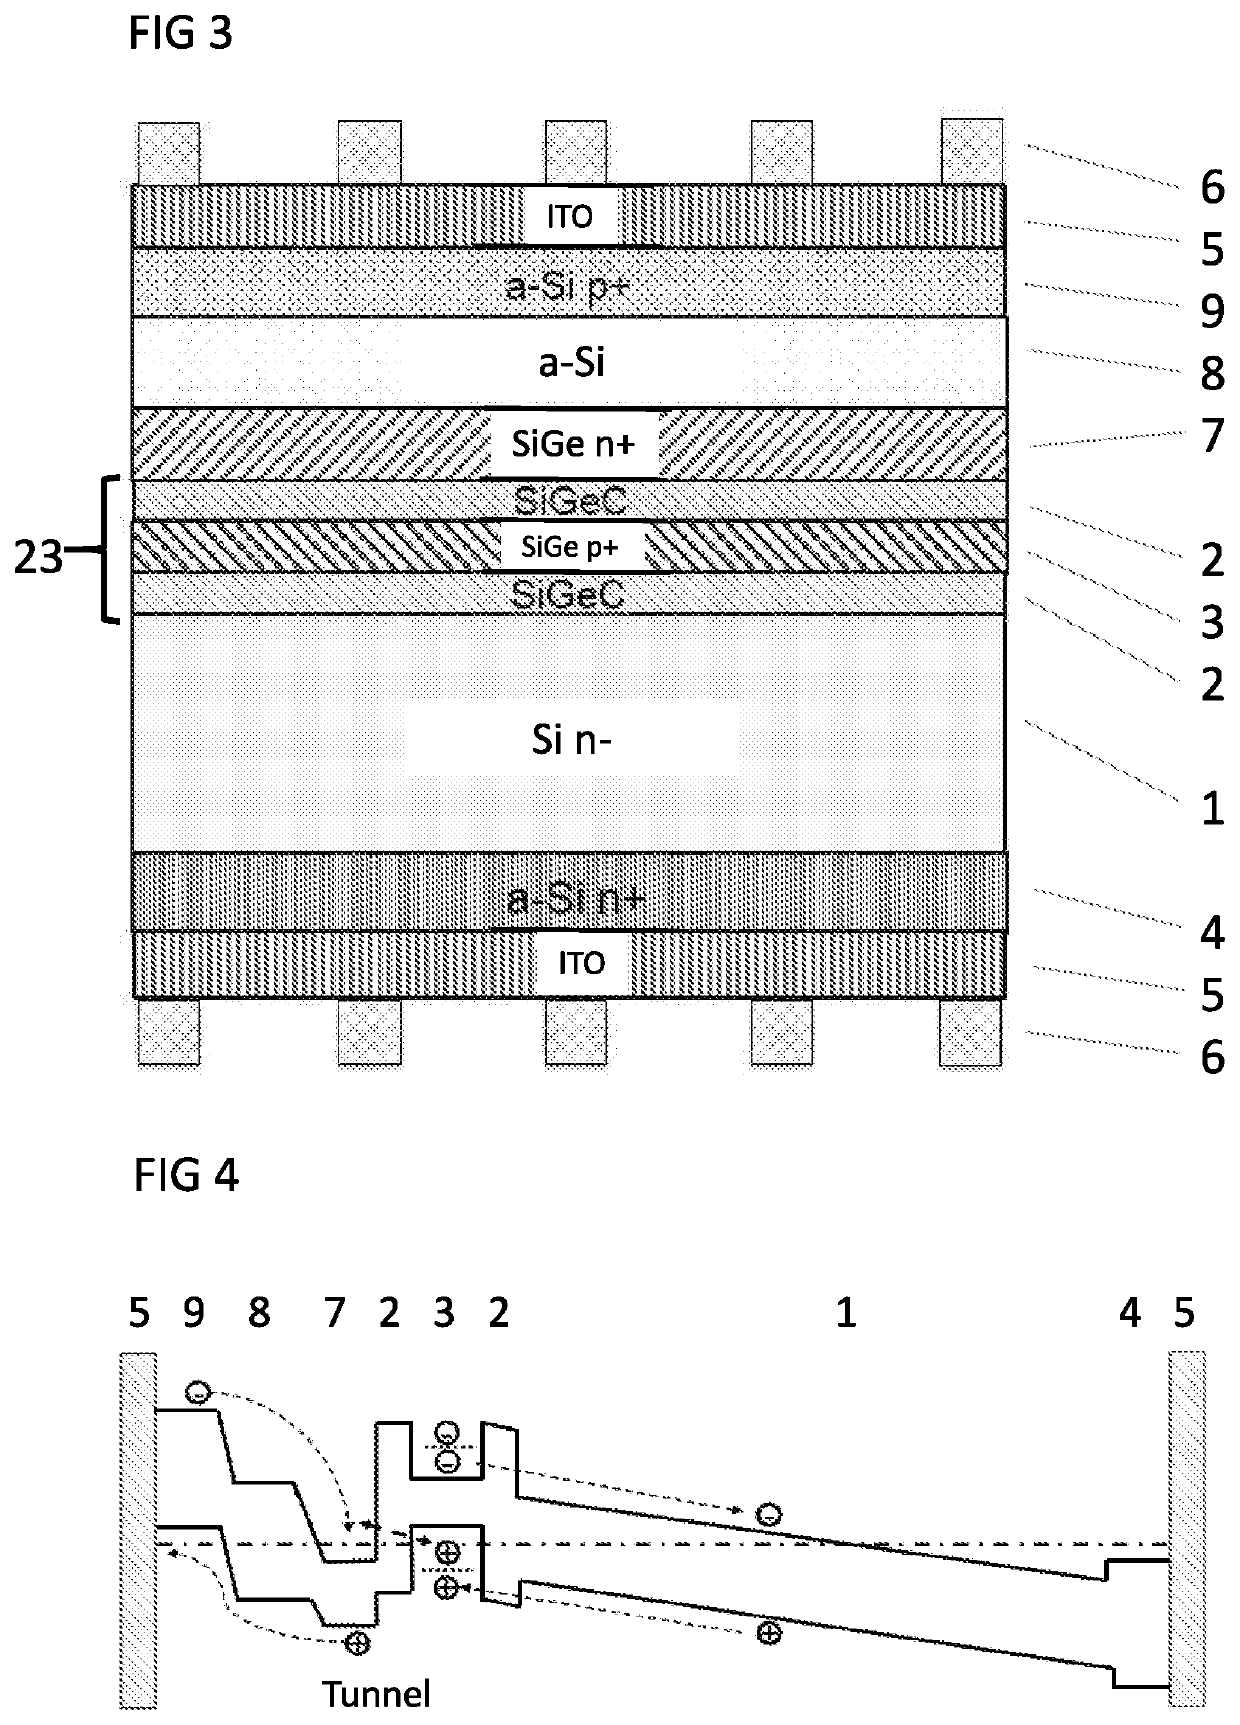 Semiconductor Component Having a Highly Doped Quantum Structure Emitter